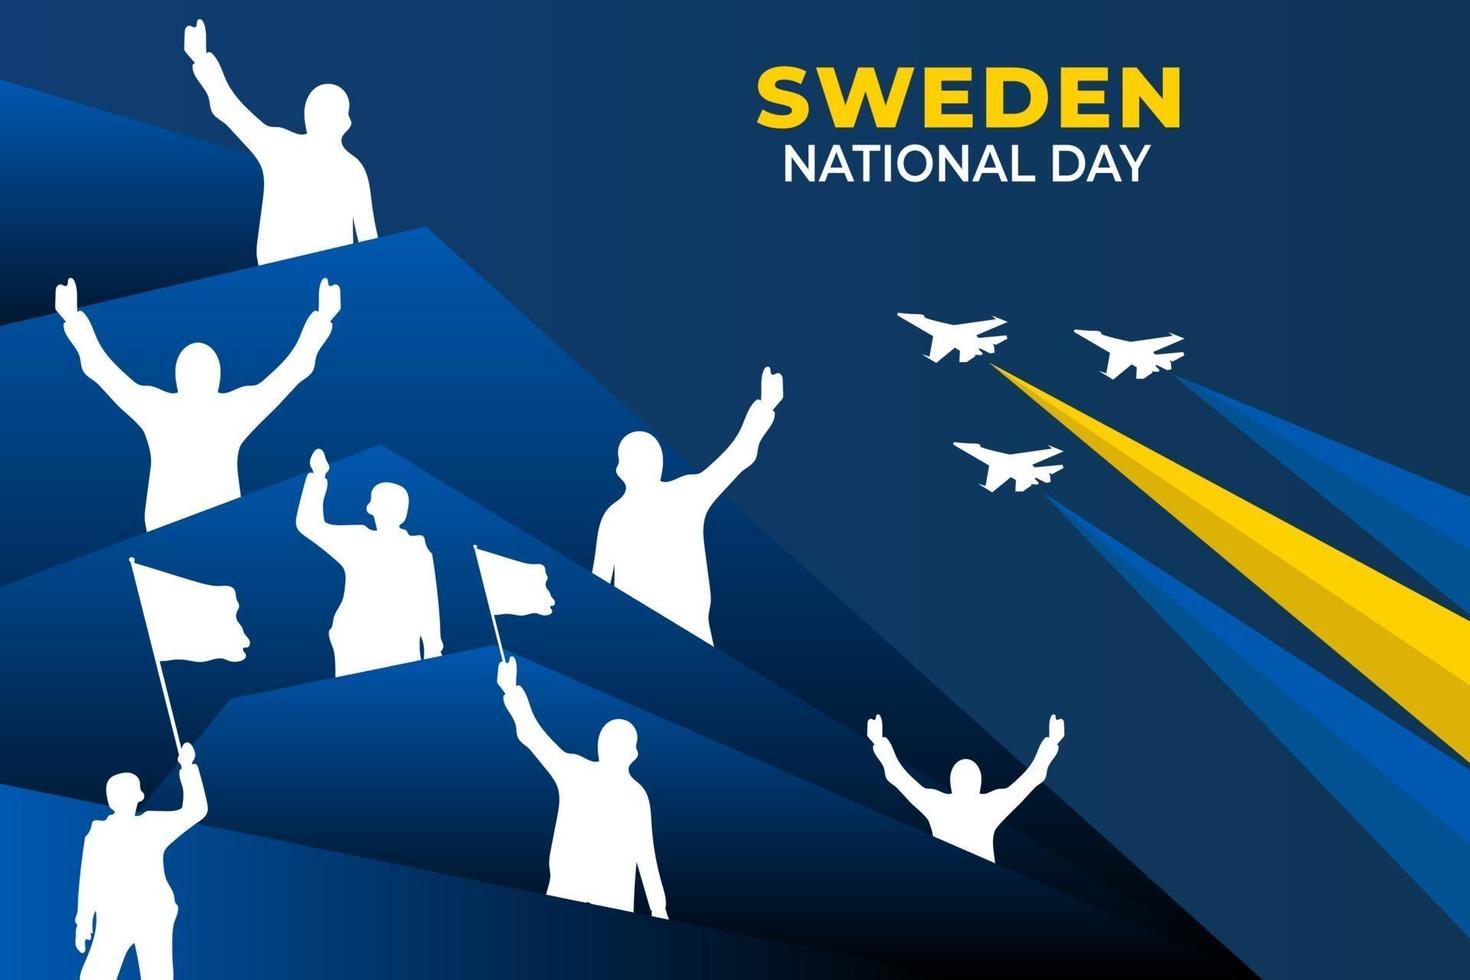 Sweden National Day. Celebrated annually on June 6 in Sweden. Happy national holiday of freedom. Sweden flag. Patriotic poster design. vector